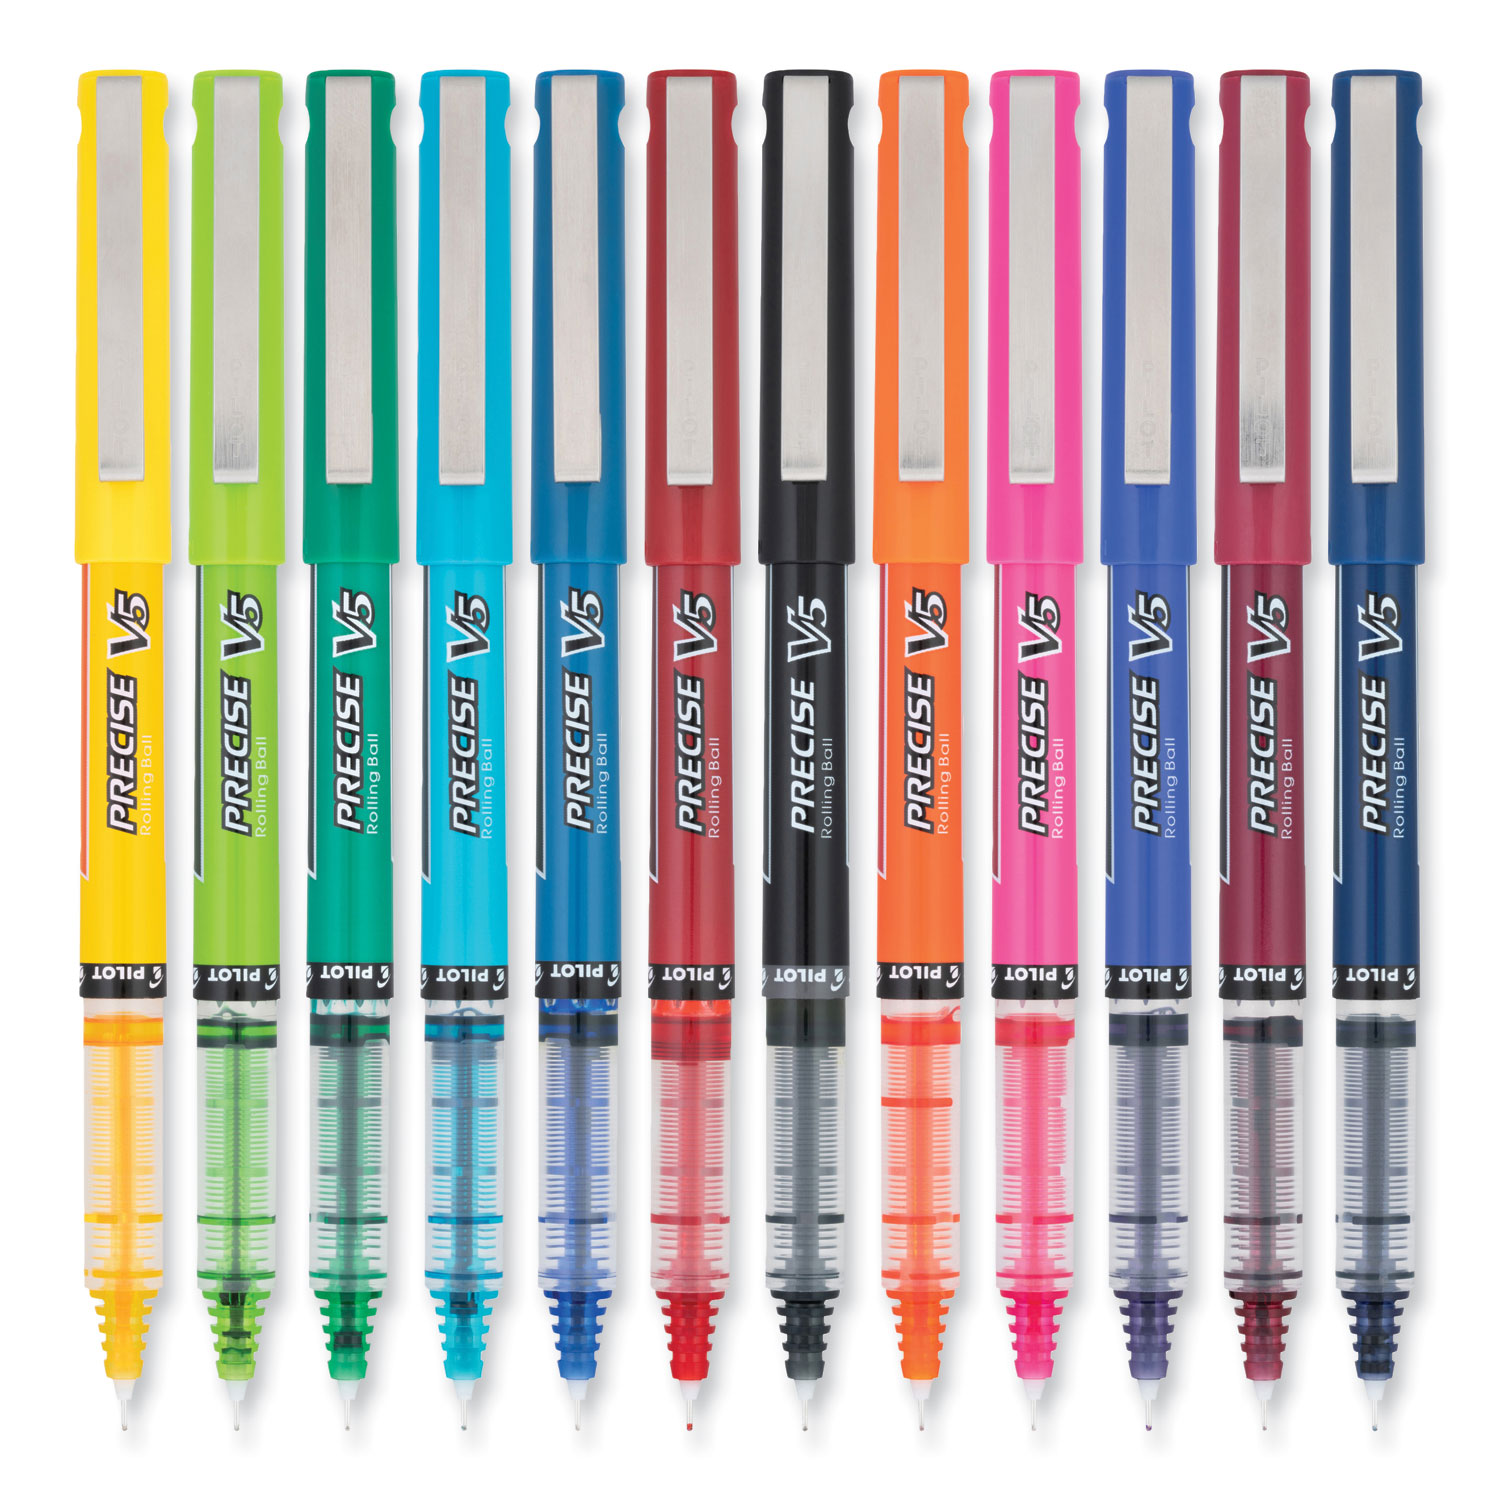 Precise V5 Roller Ball Pen, Stick, Fine 0.5 mm, Assorted Ink and